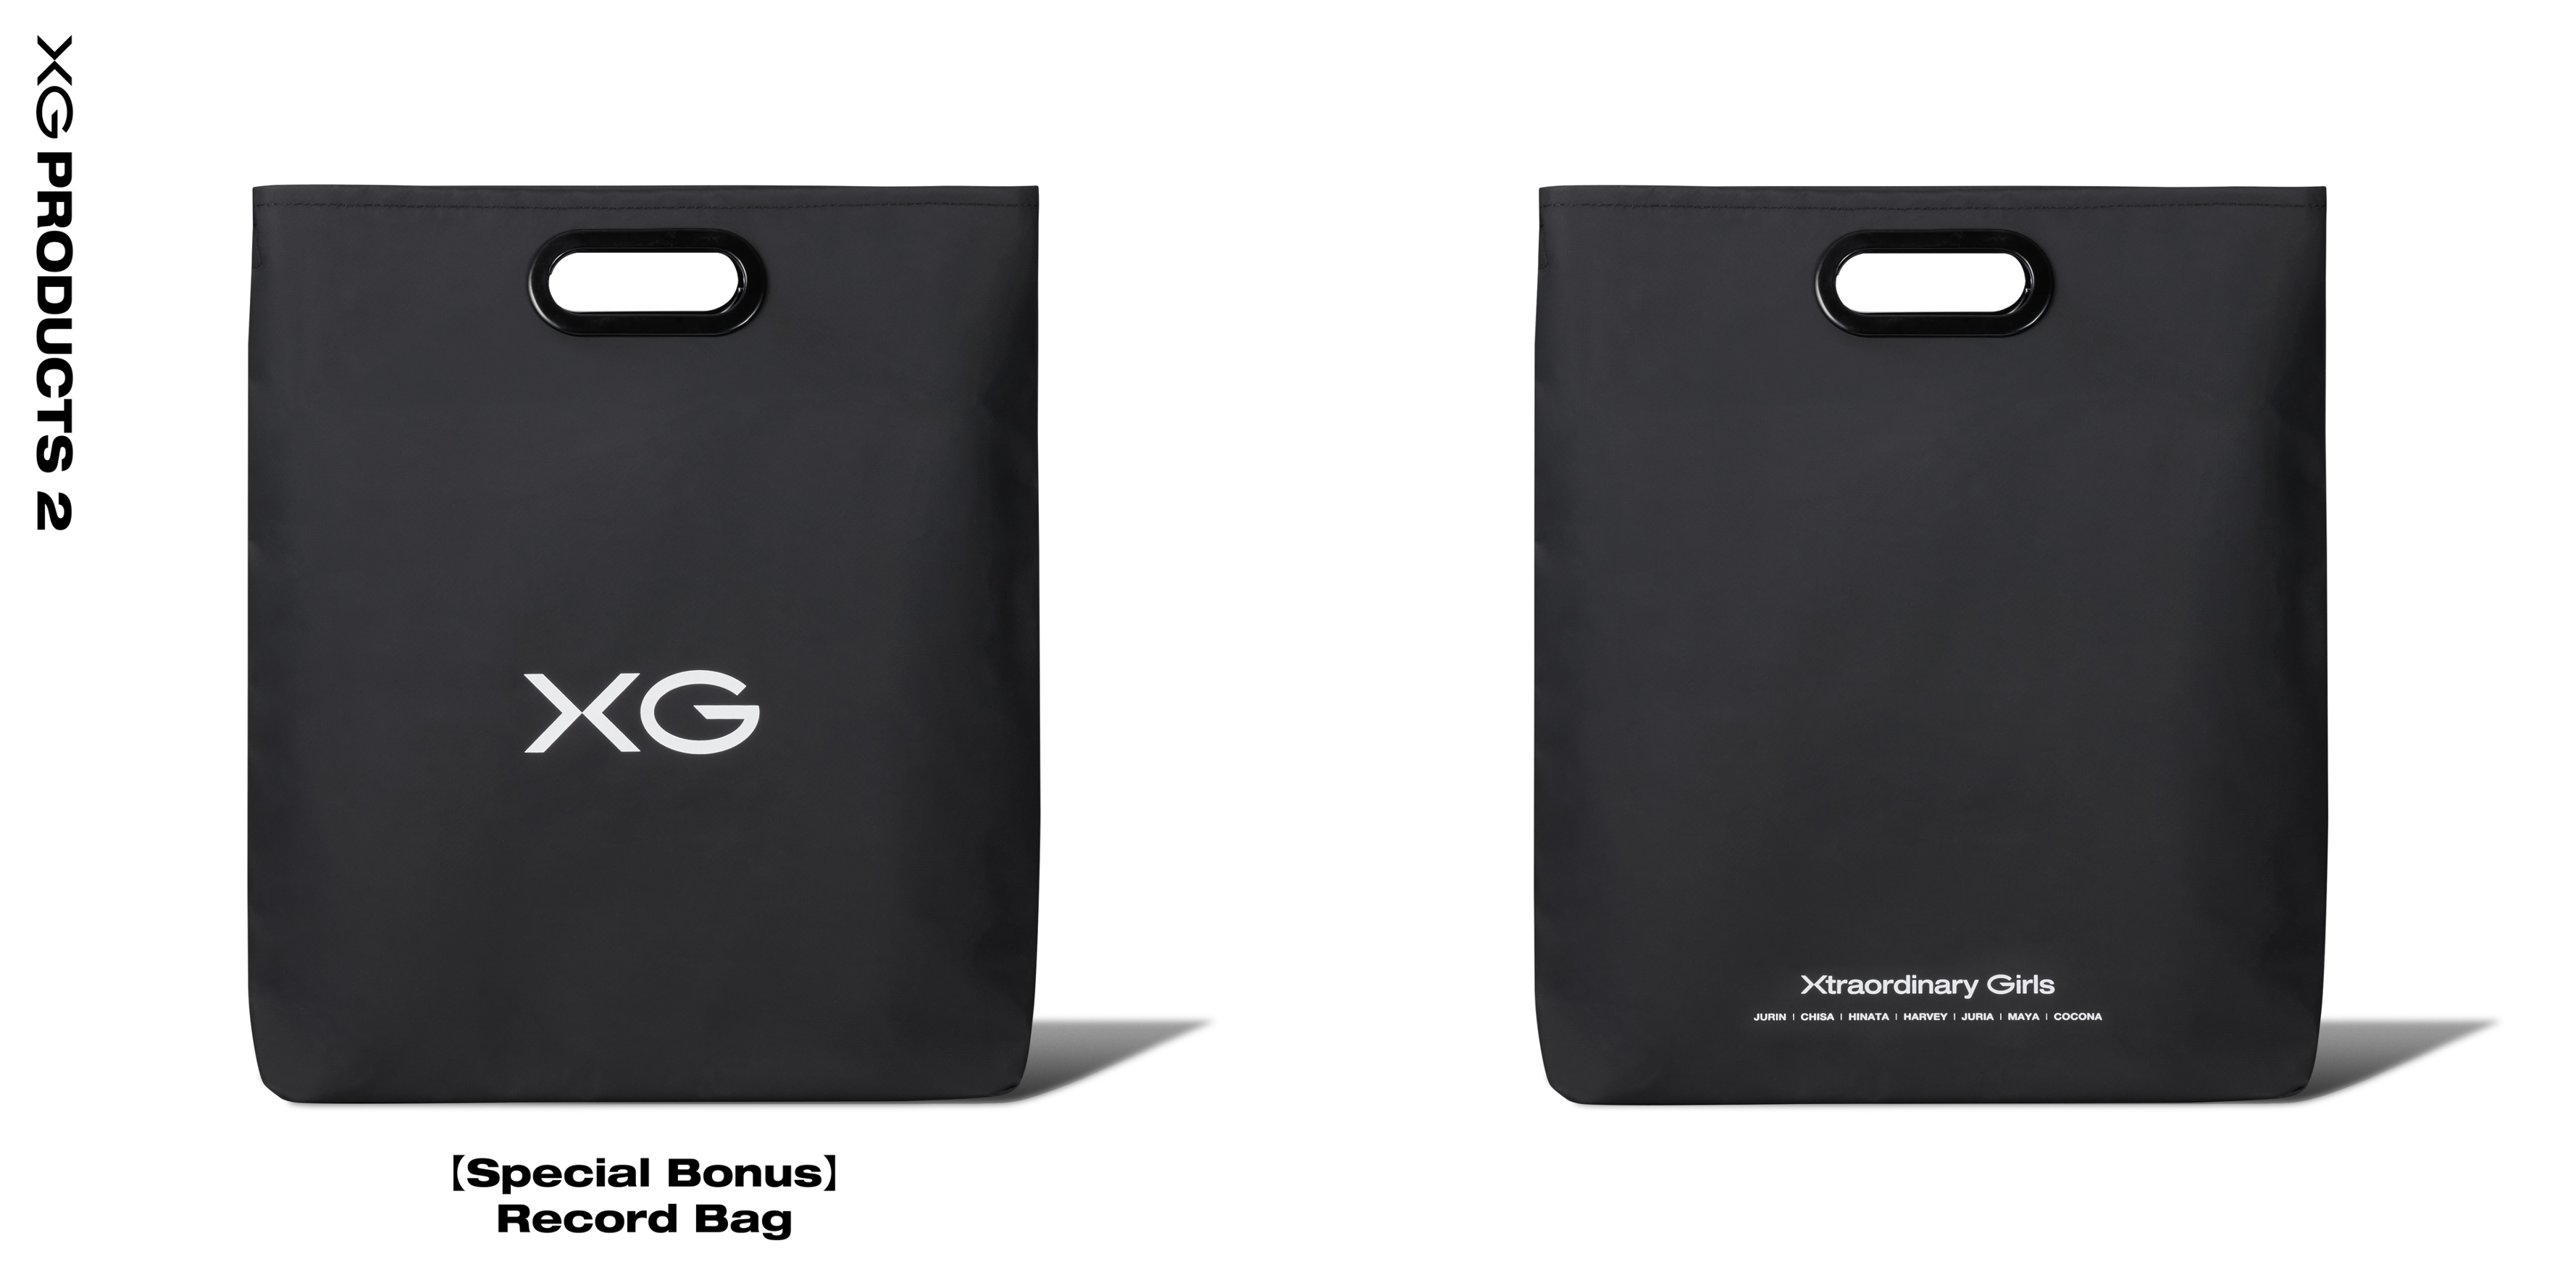 XG OFFICIAL MERCHANDISE “XG PRODUCTS 2” Launch Details! - NEWS 